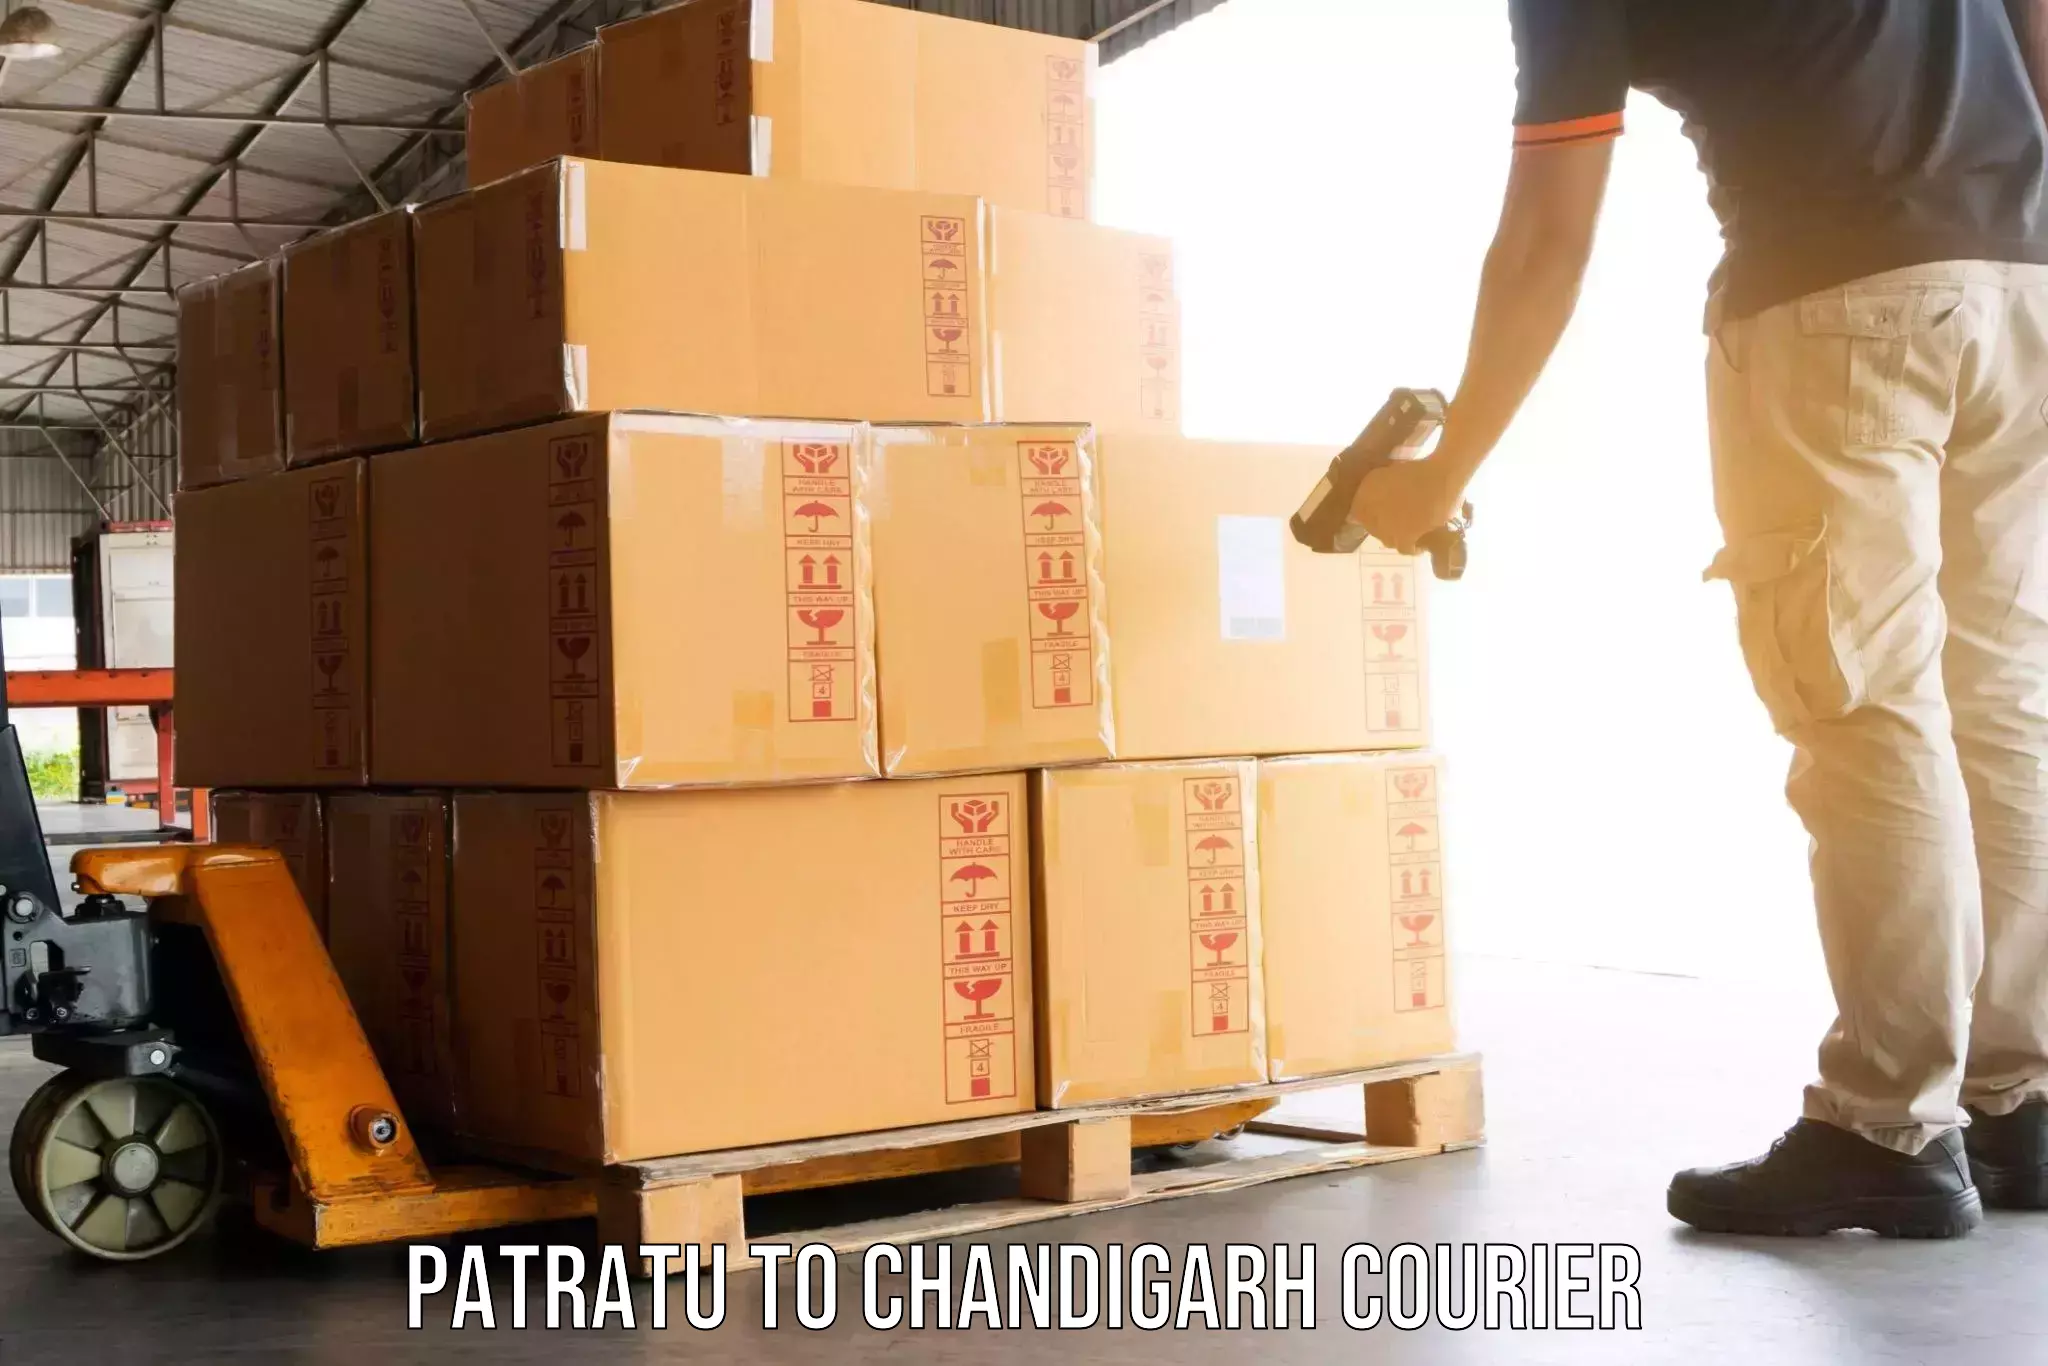 Moving and packing experts Patratu to Chandigarh